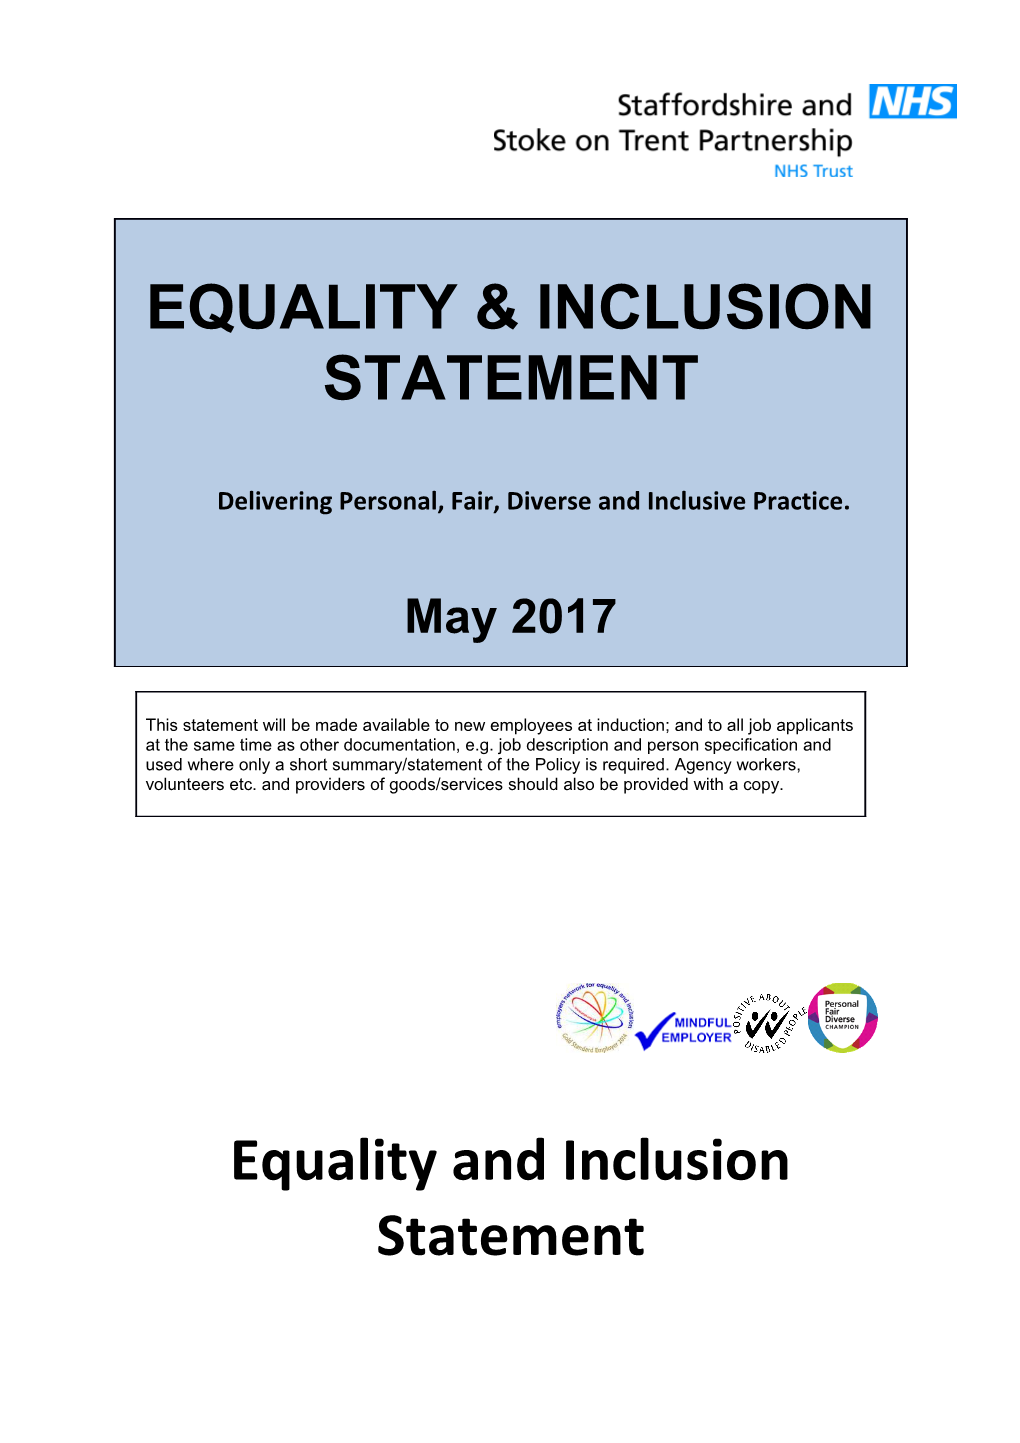 Equality and Inclusion Statement